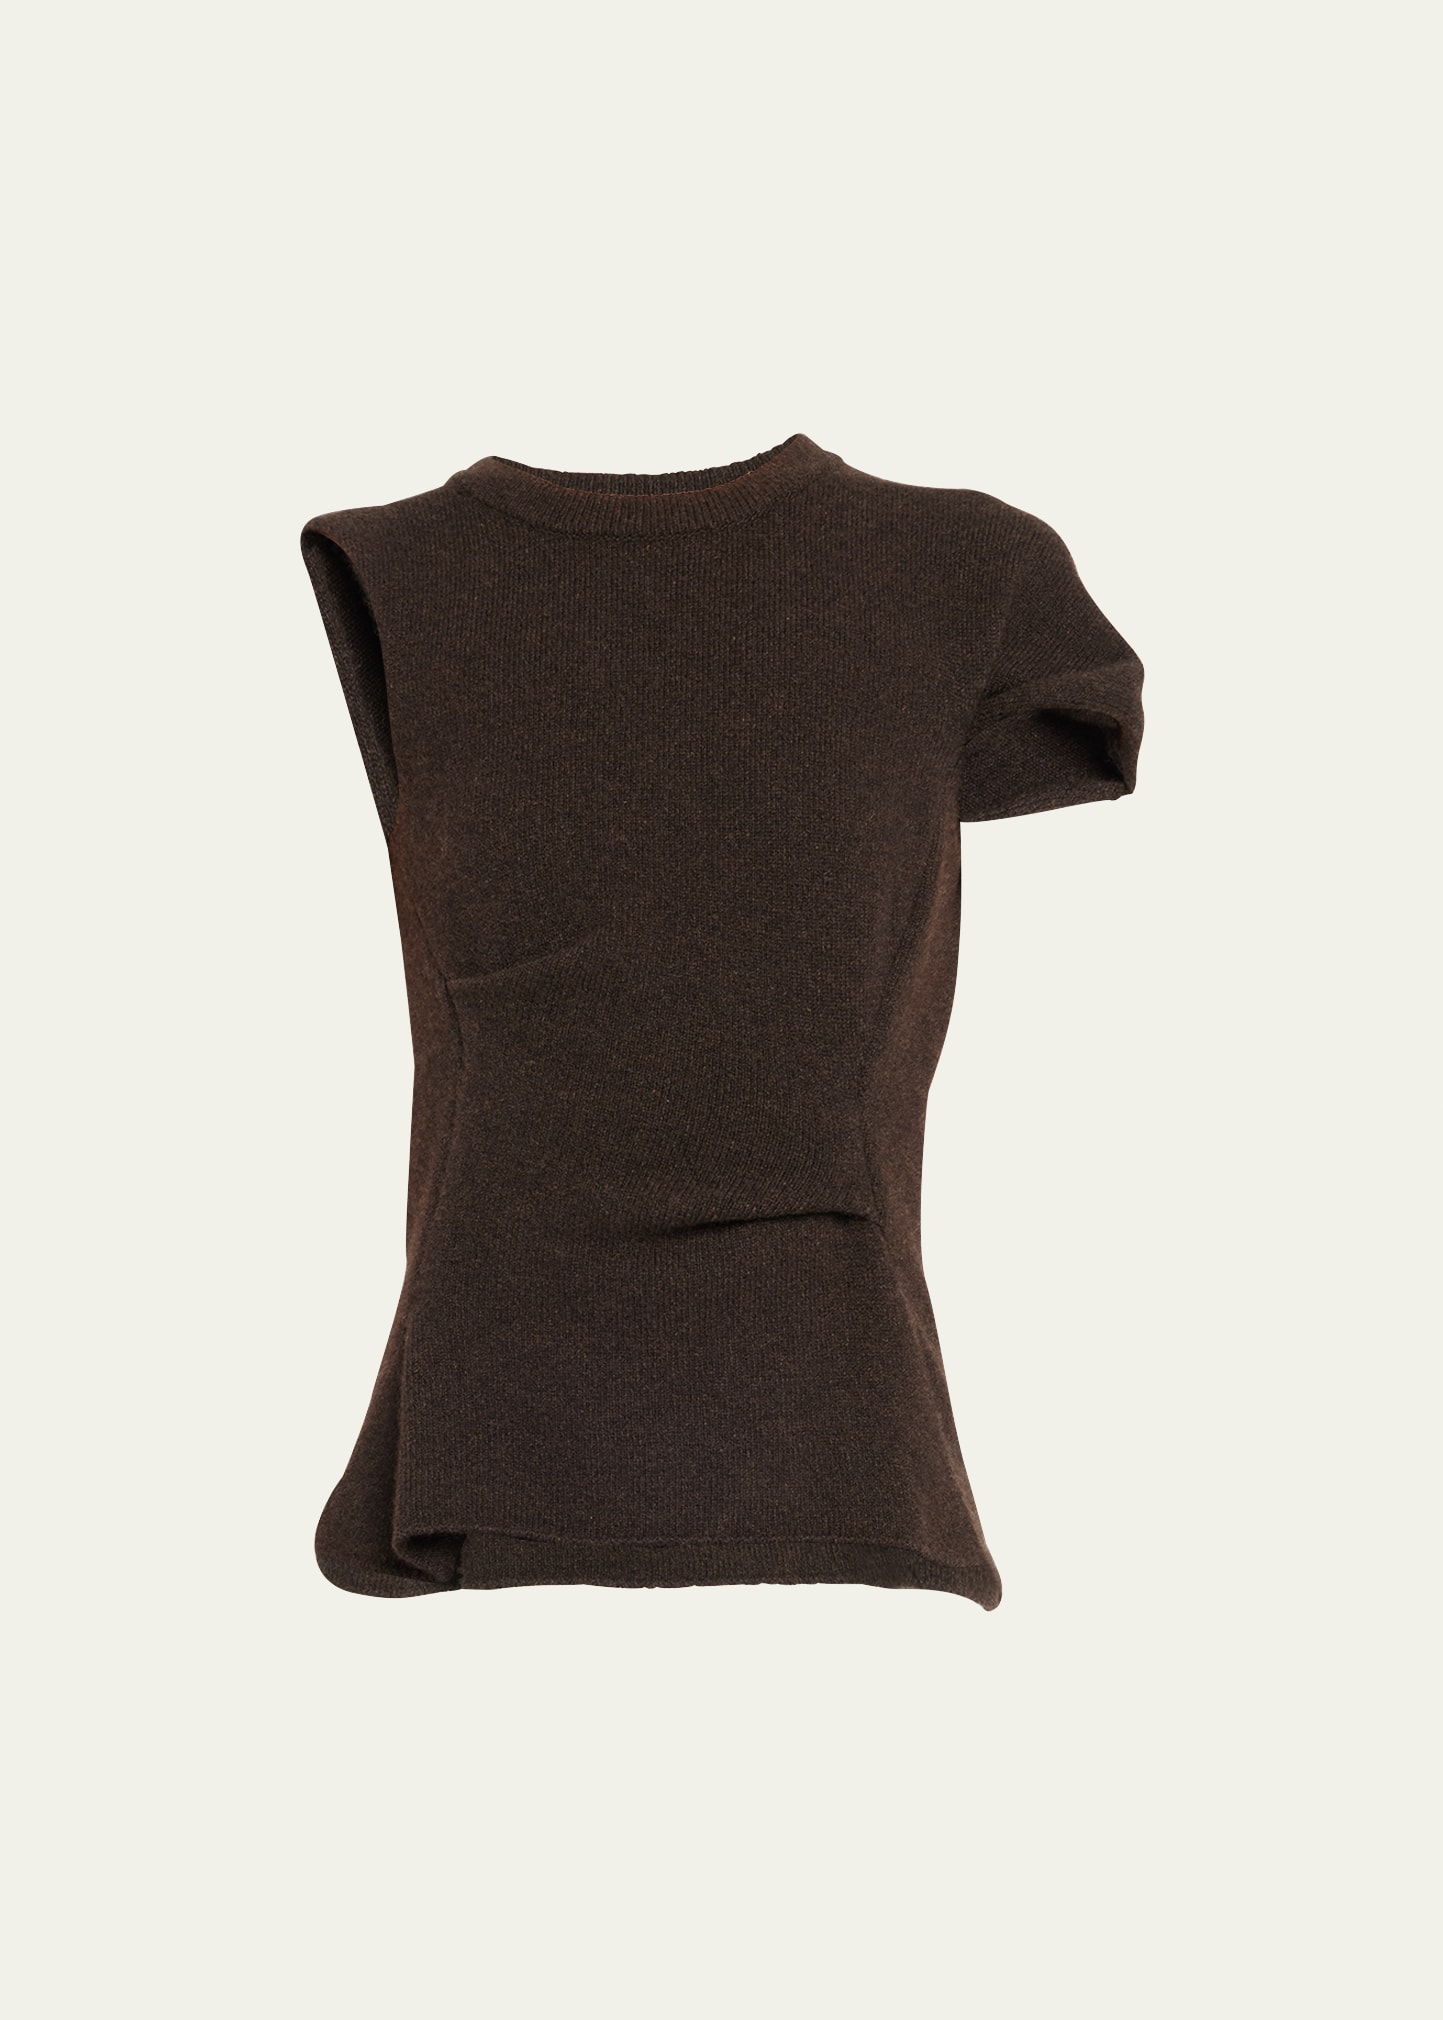 THE ROW CHARLISE CASHMERE ASYMMETRIC TOP